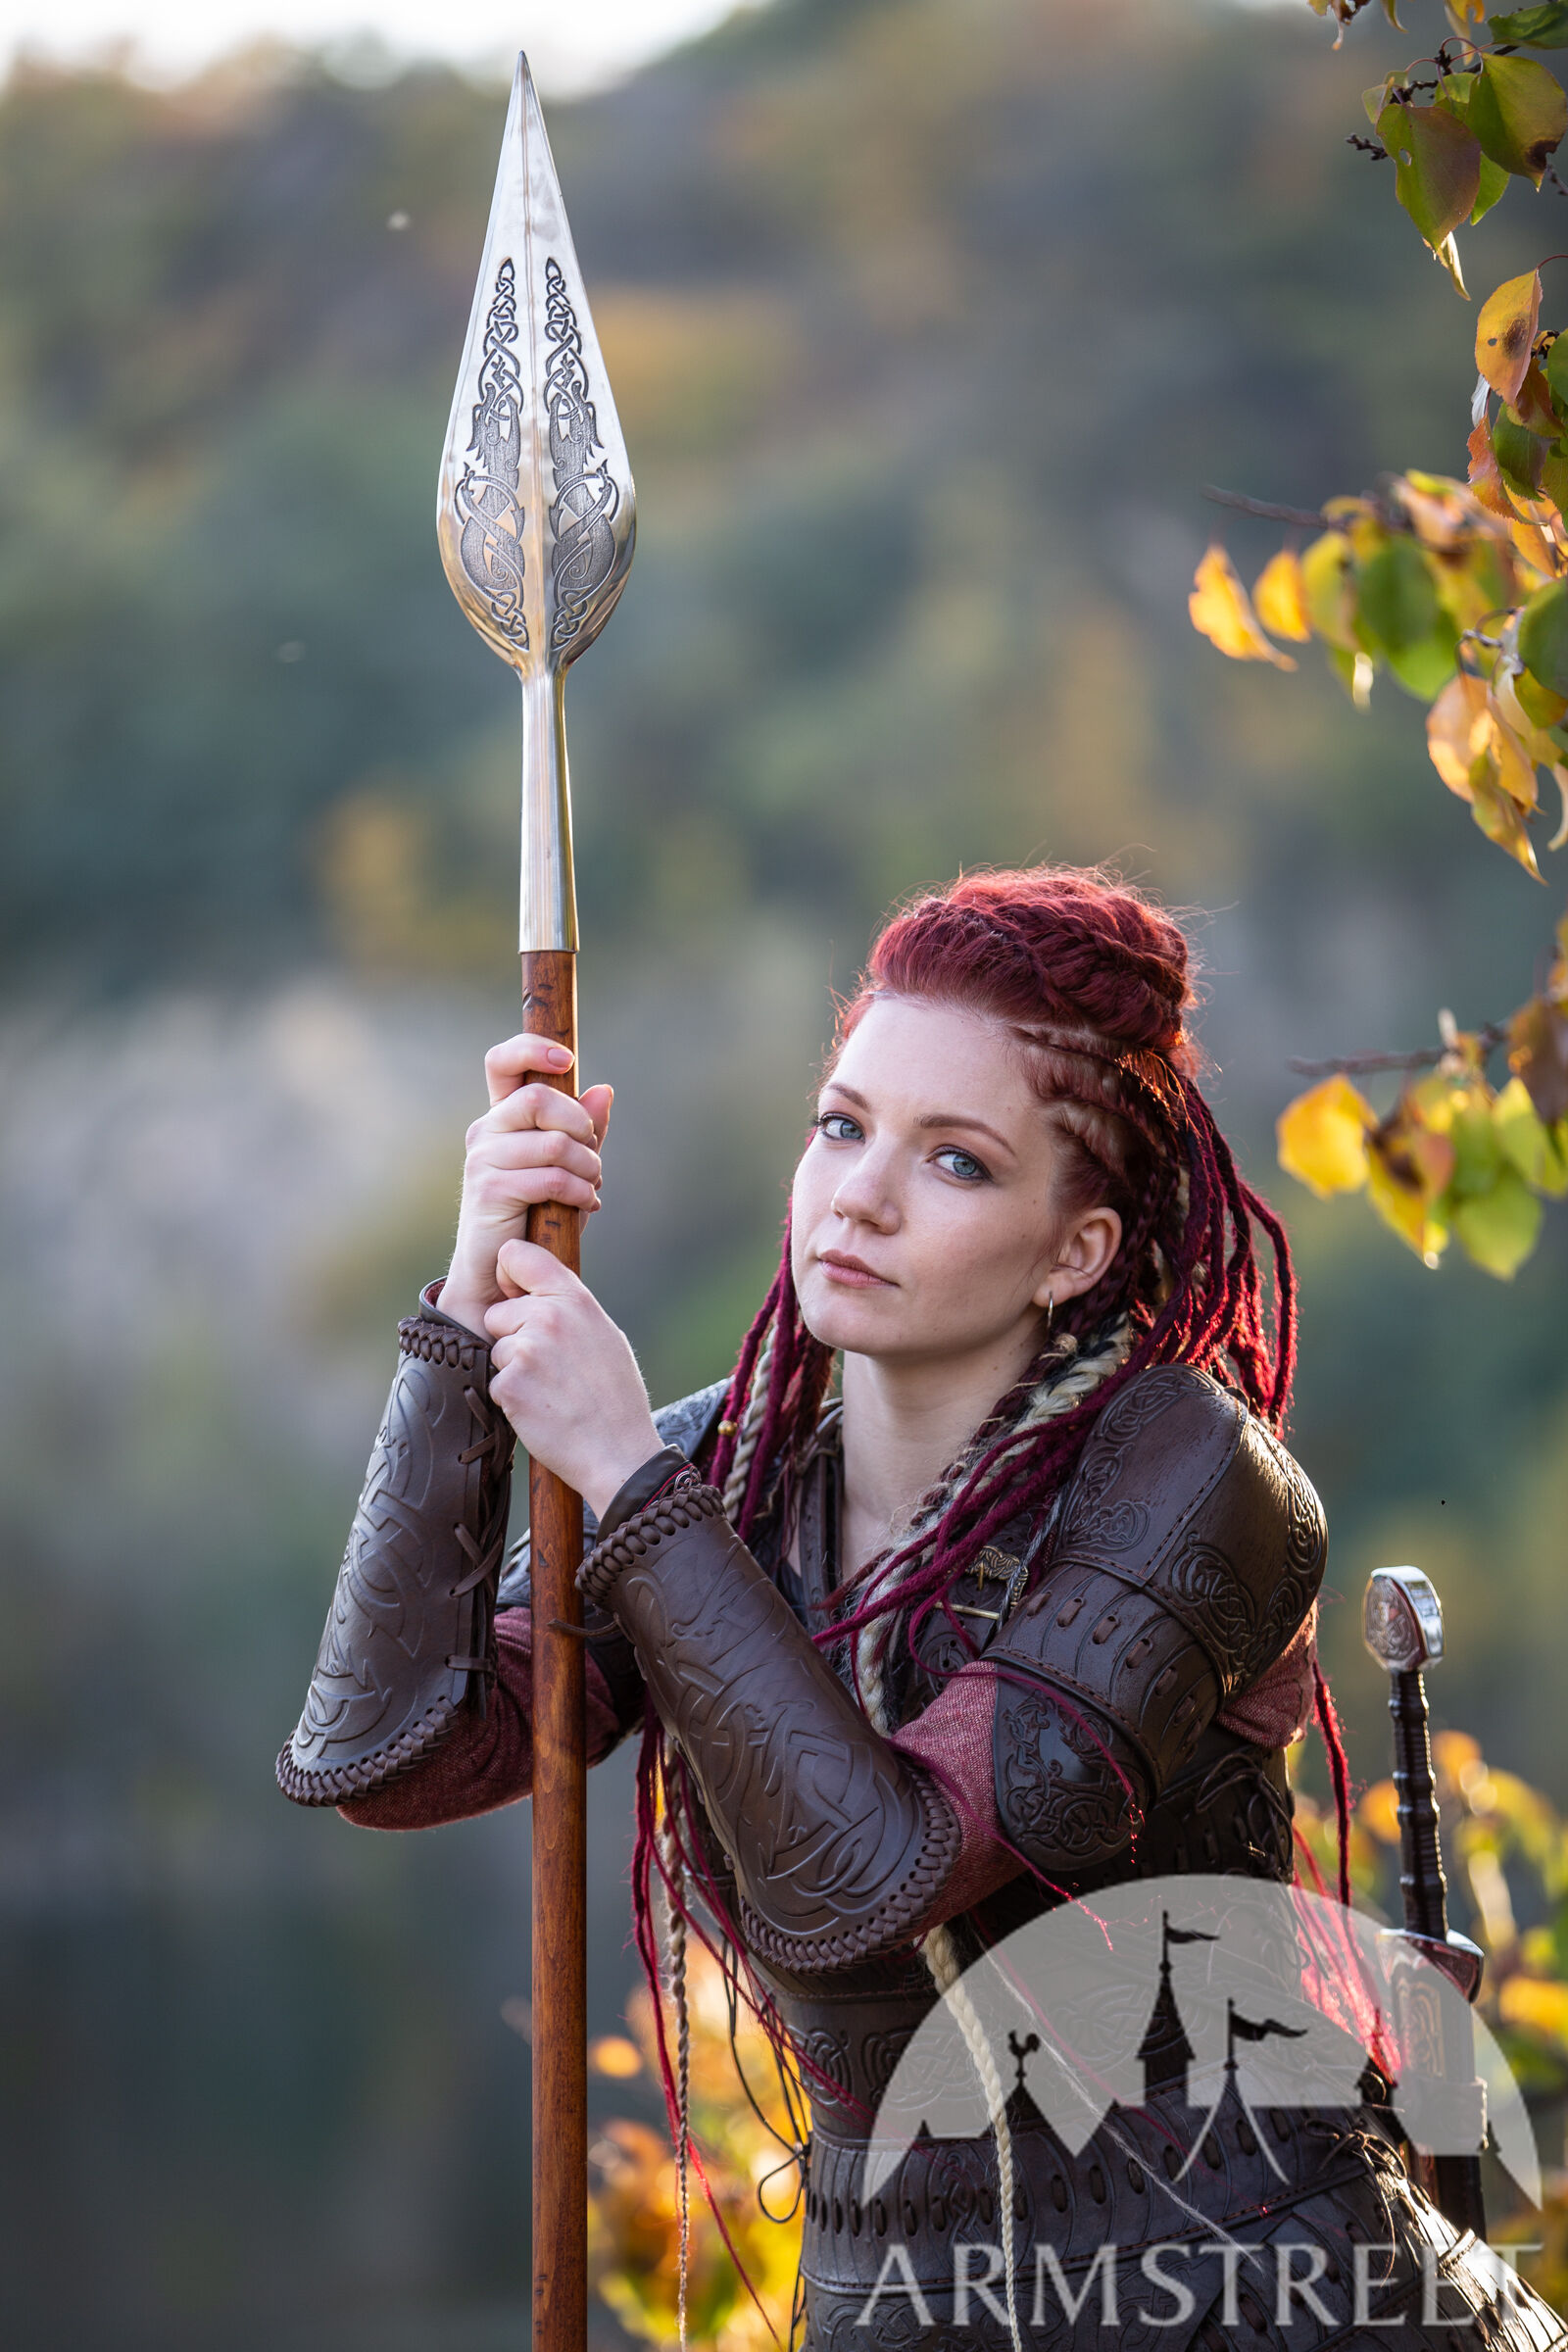 Viking's Leather Armour "Shieldmaiden". Available in: brown leather ...